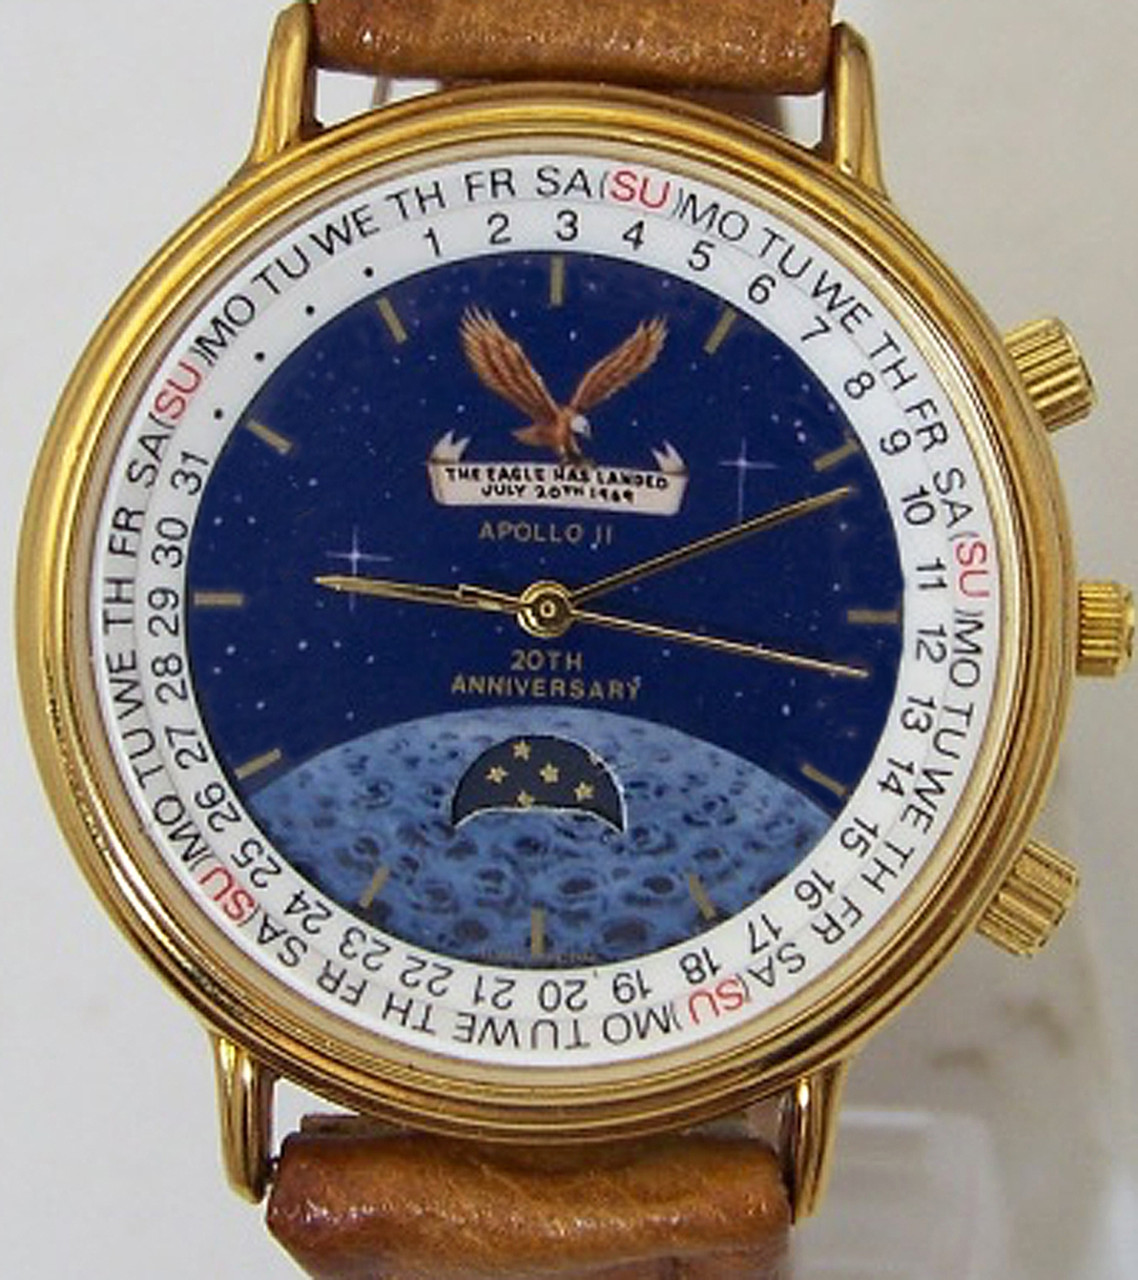 Luna-tic-tock: Facts and fools behind moon rock-made watch | collectSPACE